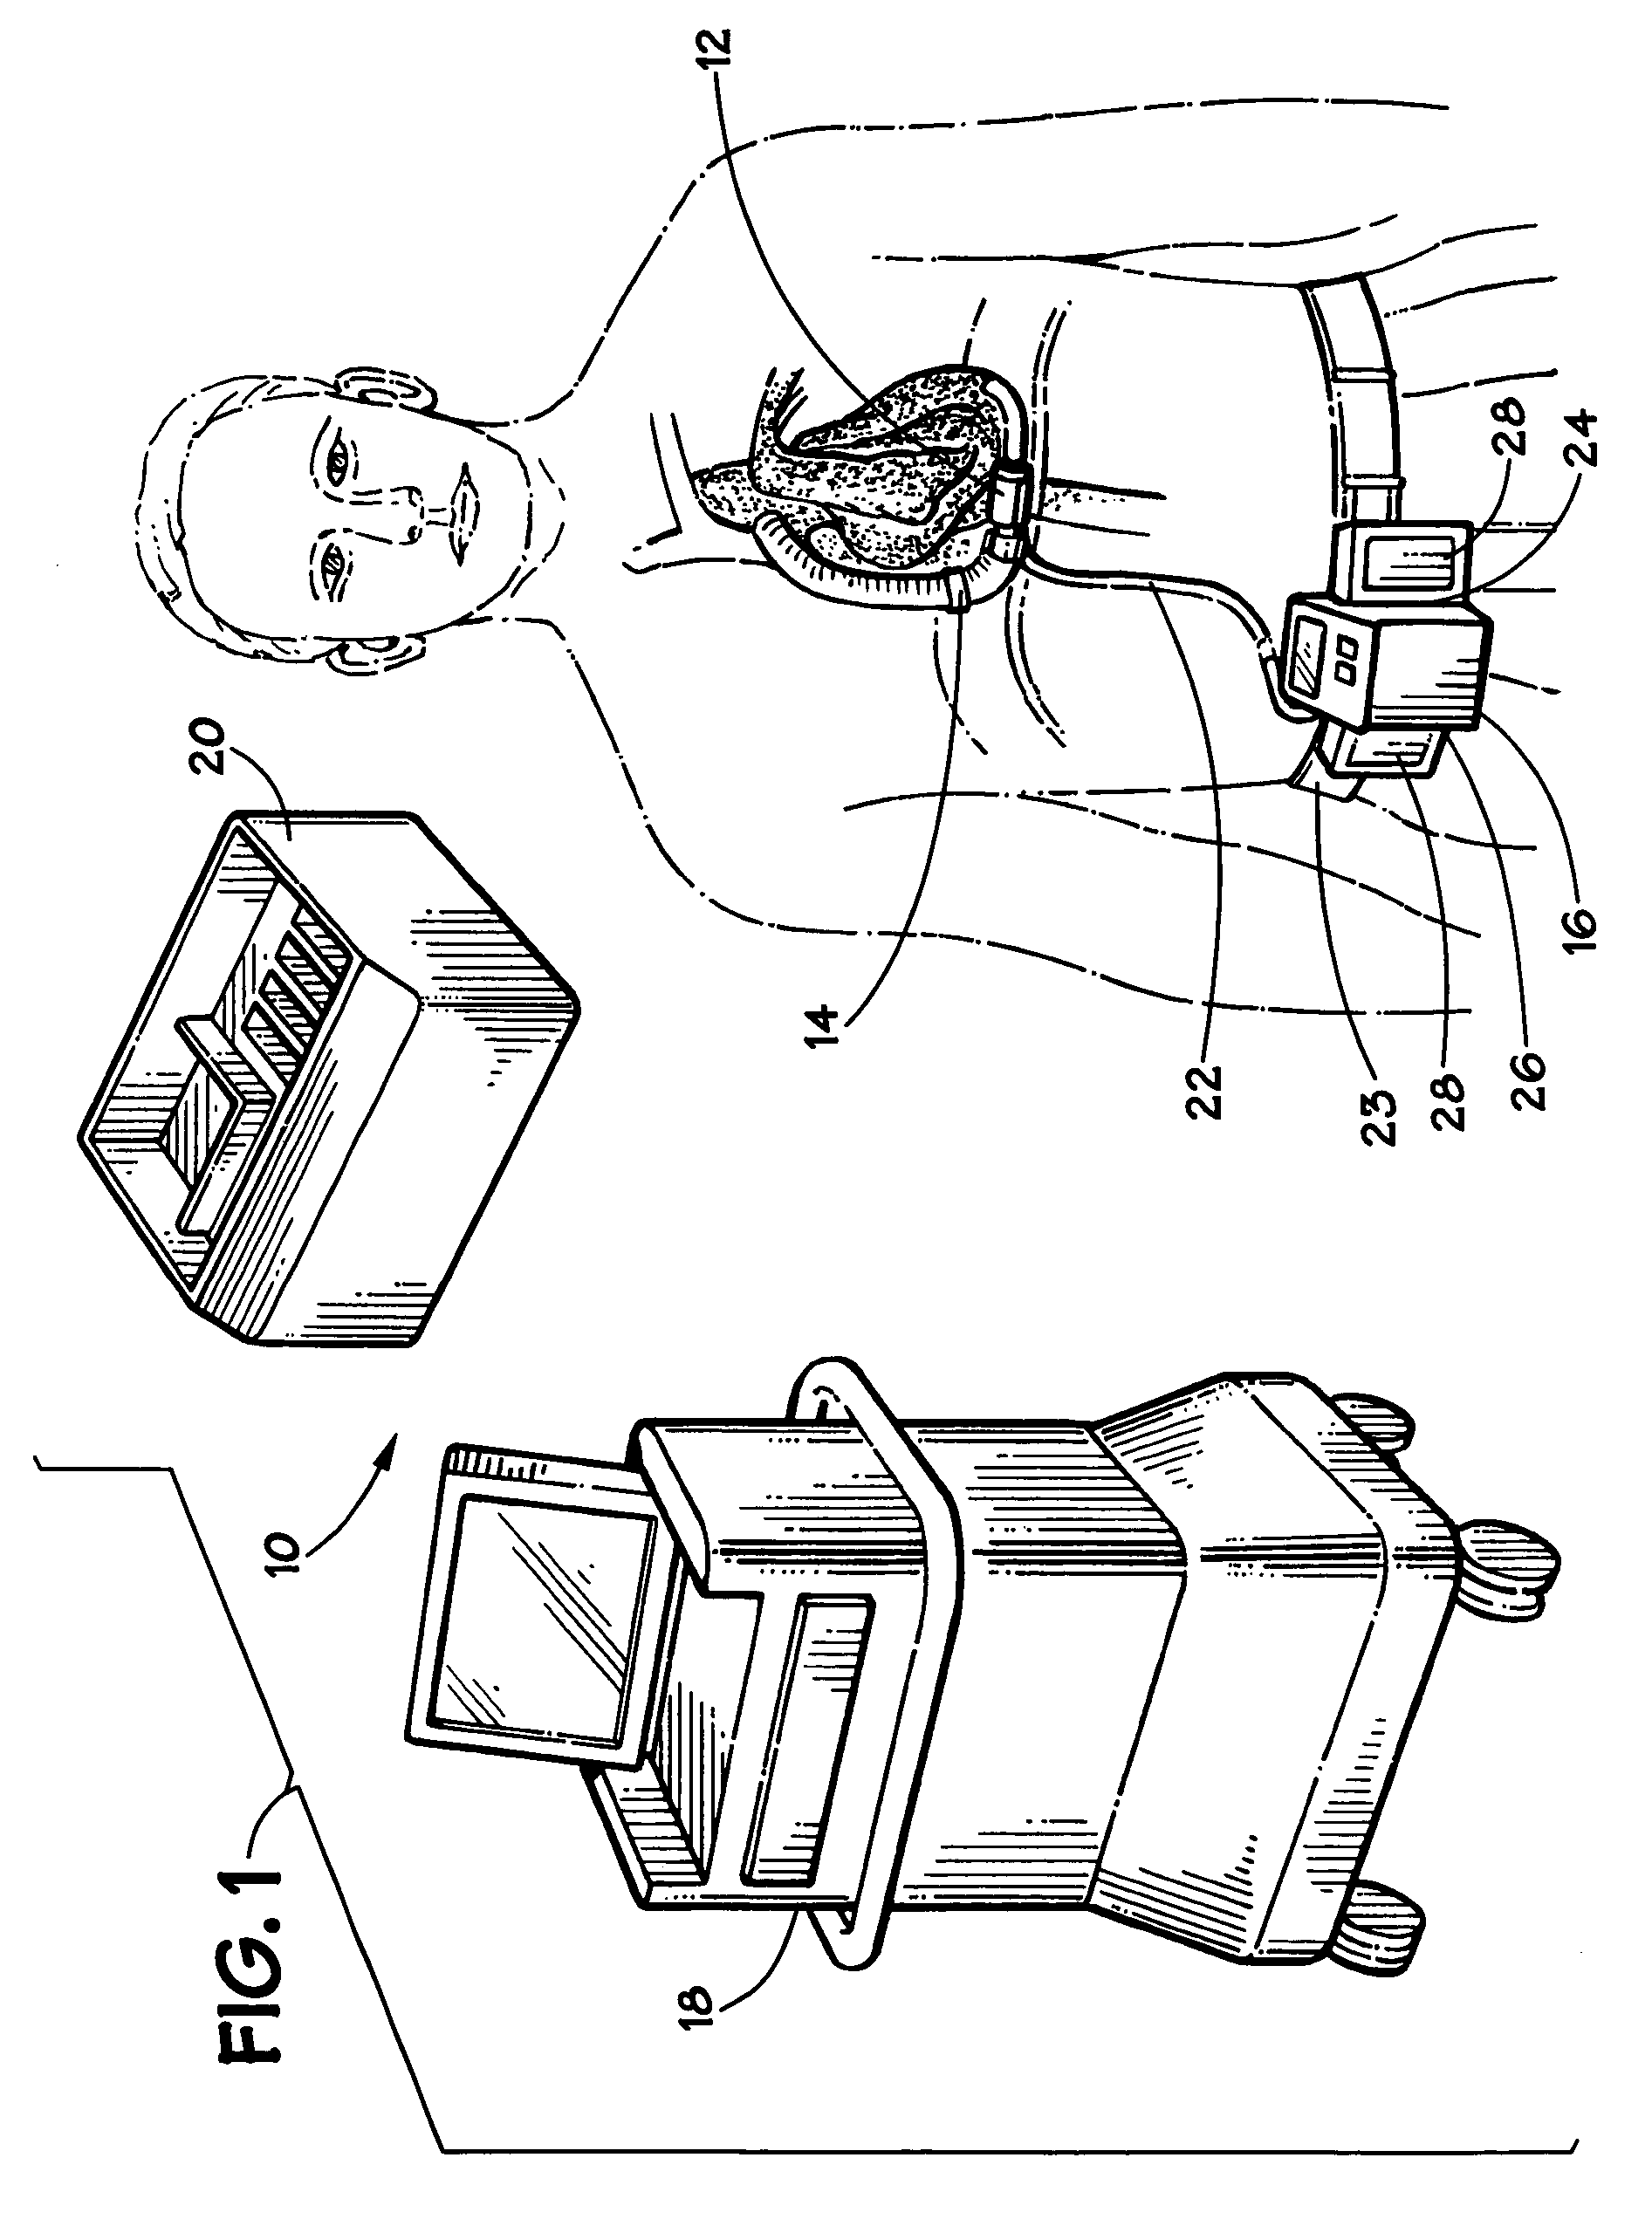 Blood pump system and method of operation